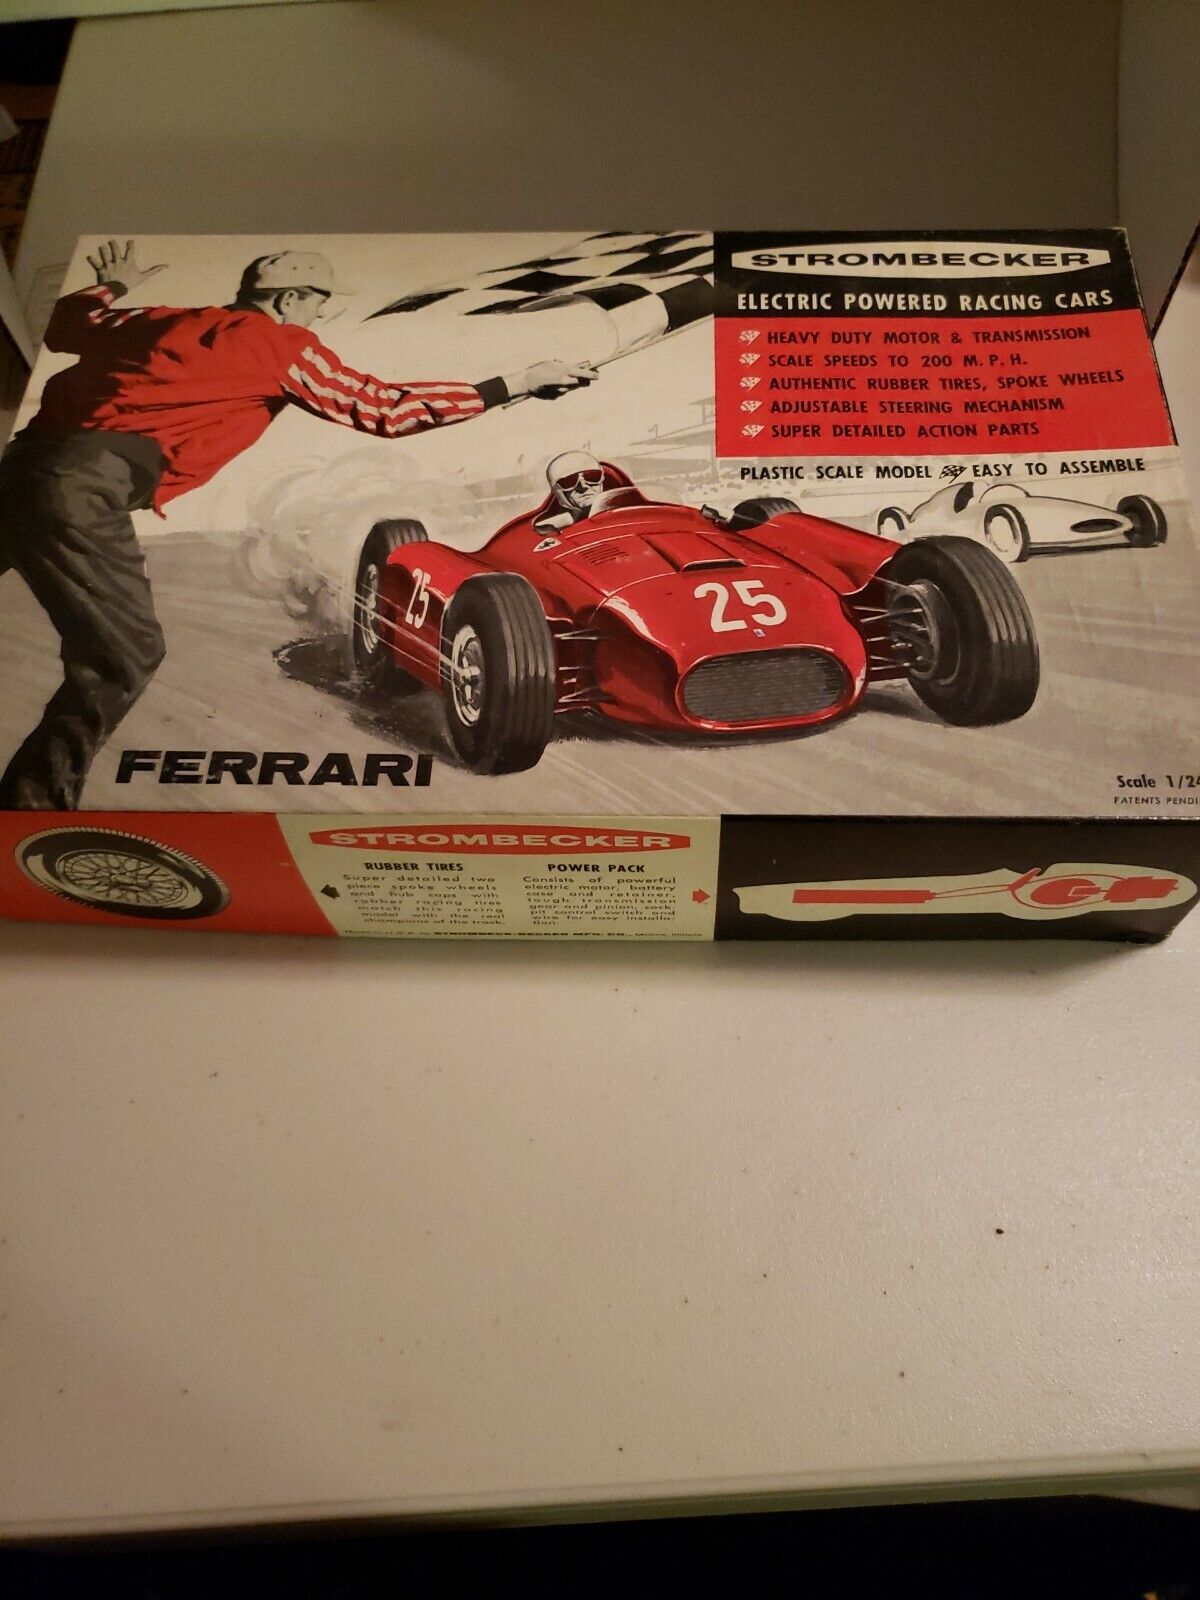 Strombecker BOX ONLY Ferrari Electric Powered Racing Car Vintage